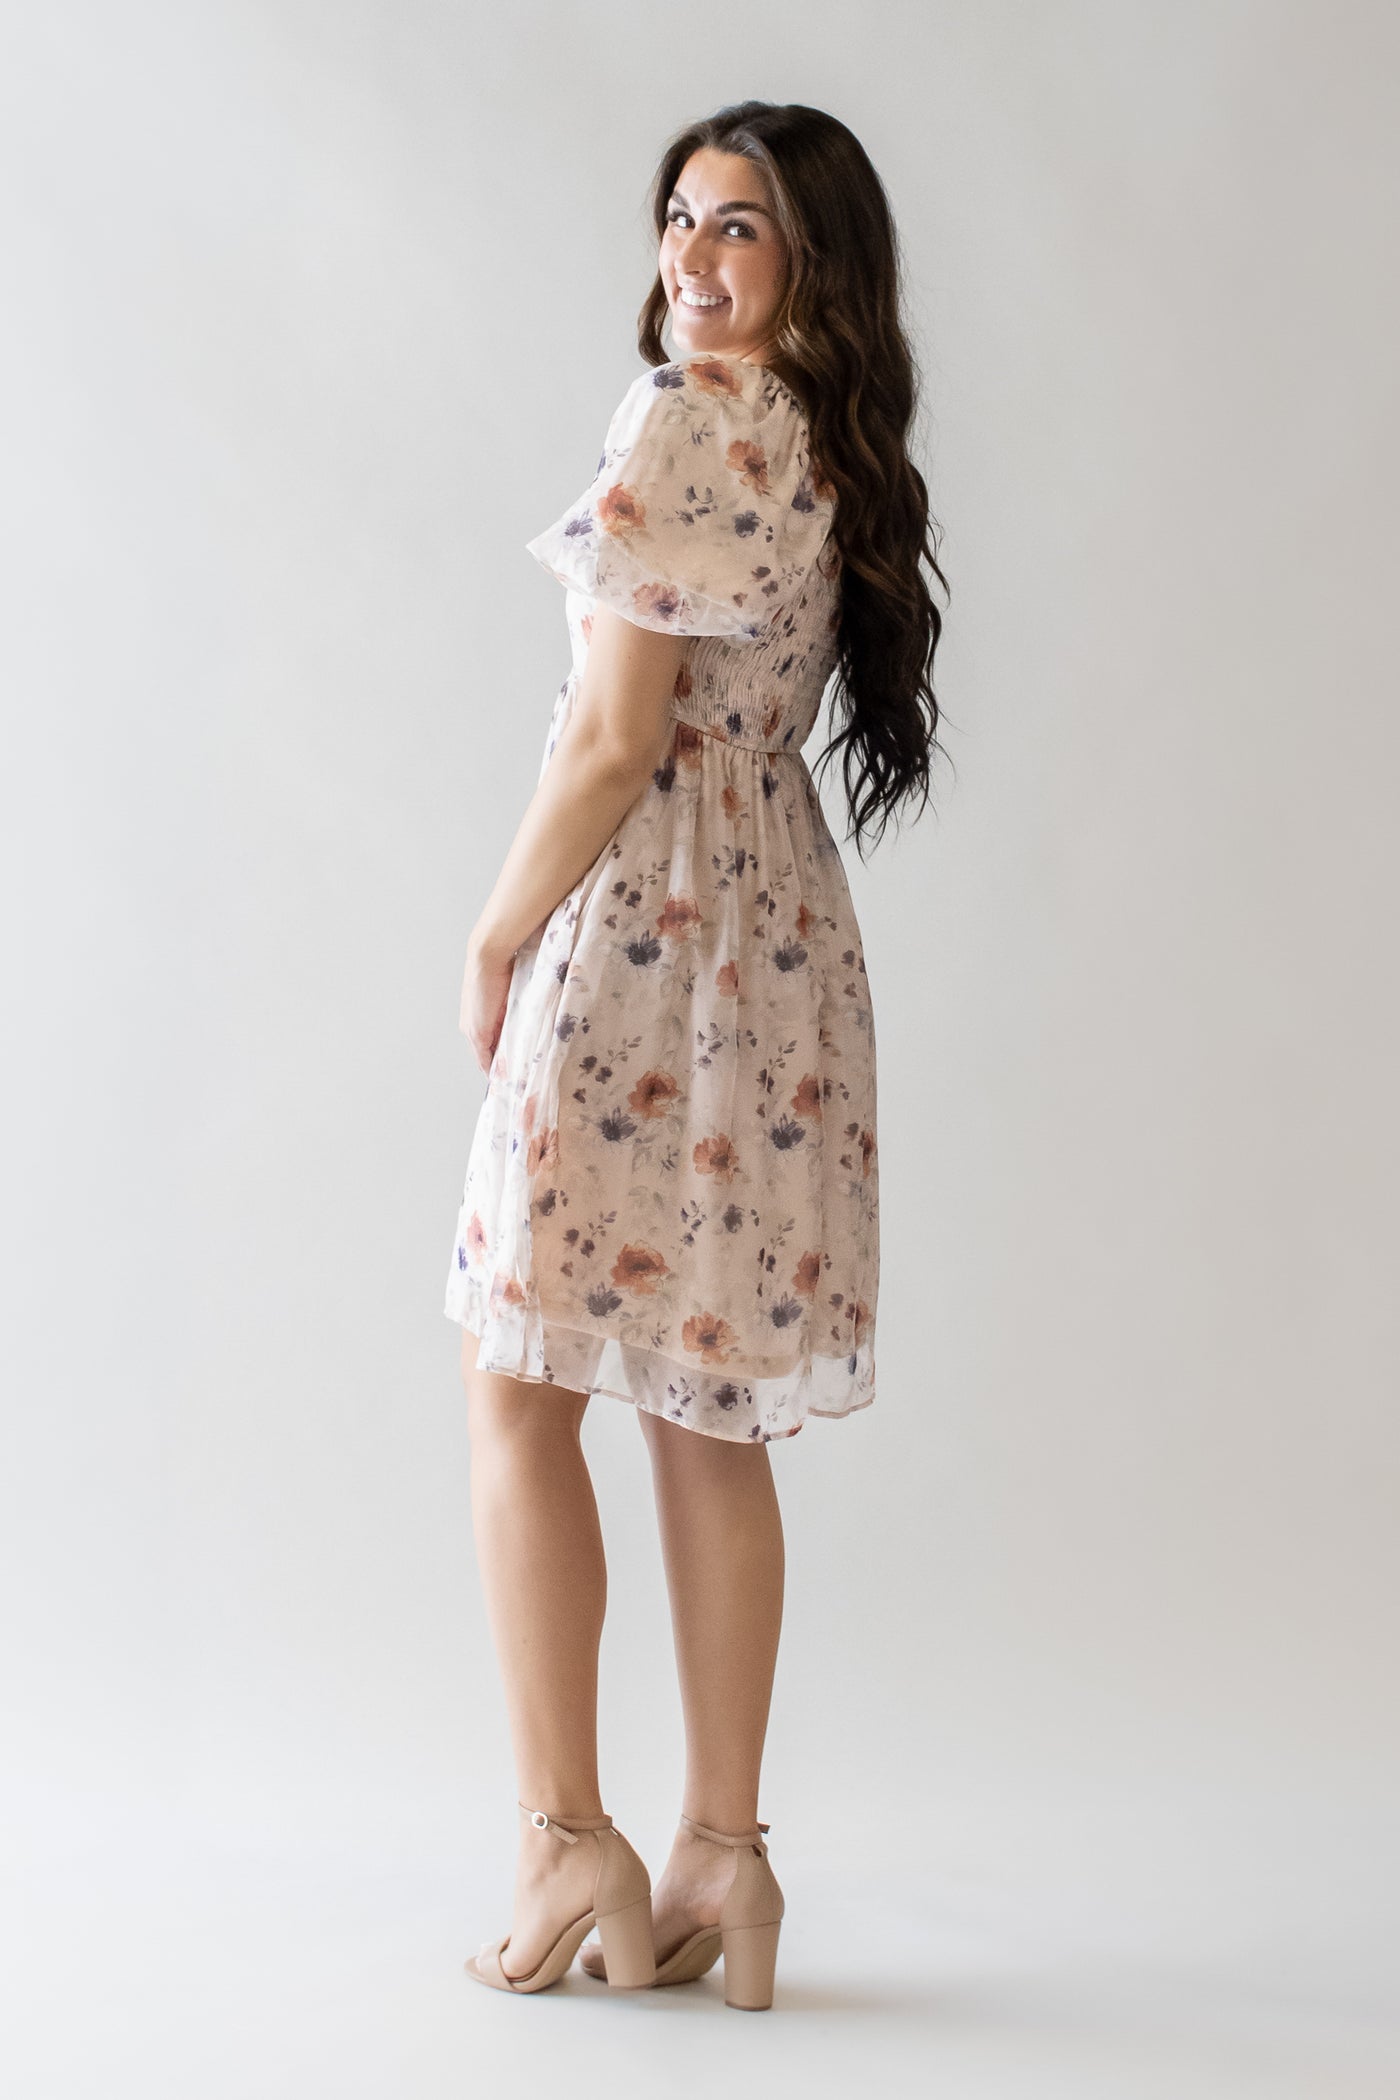 This is a modest dress with pink floral details and a knee length skirt.